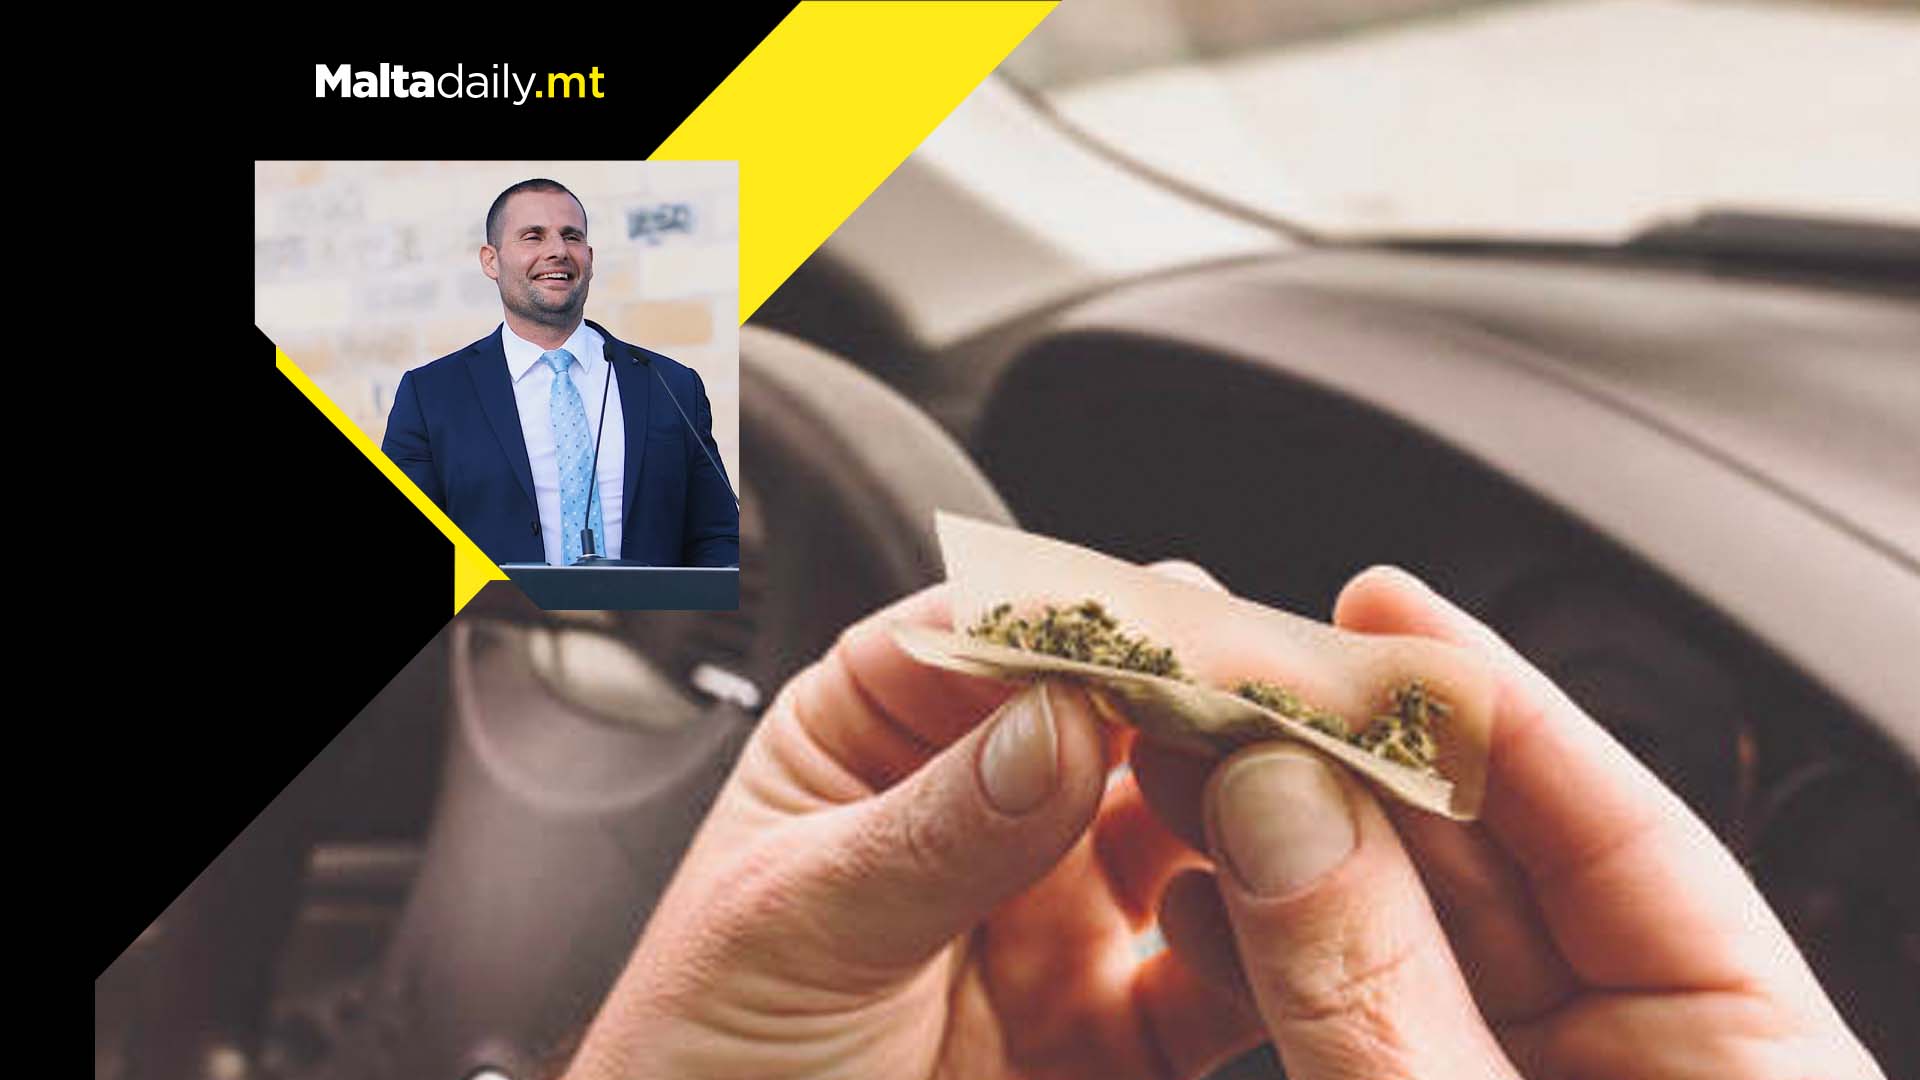 No you can’t drive stoned says Prime Minister